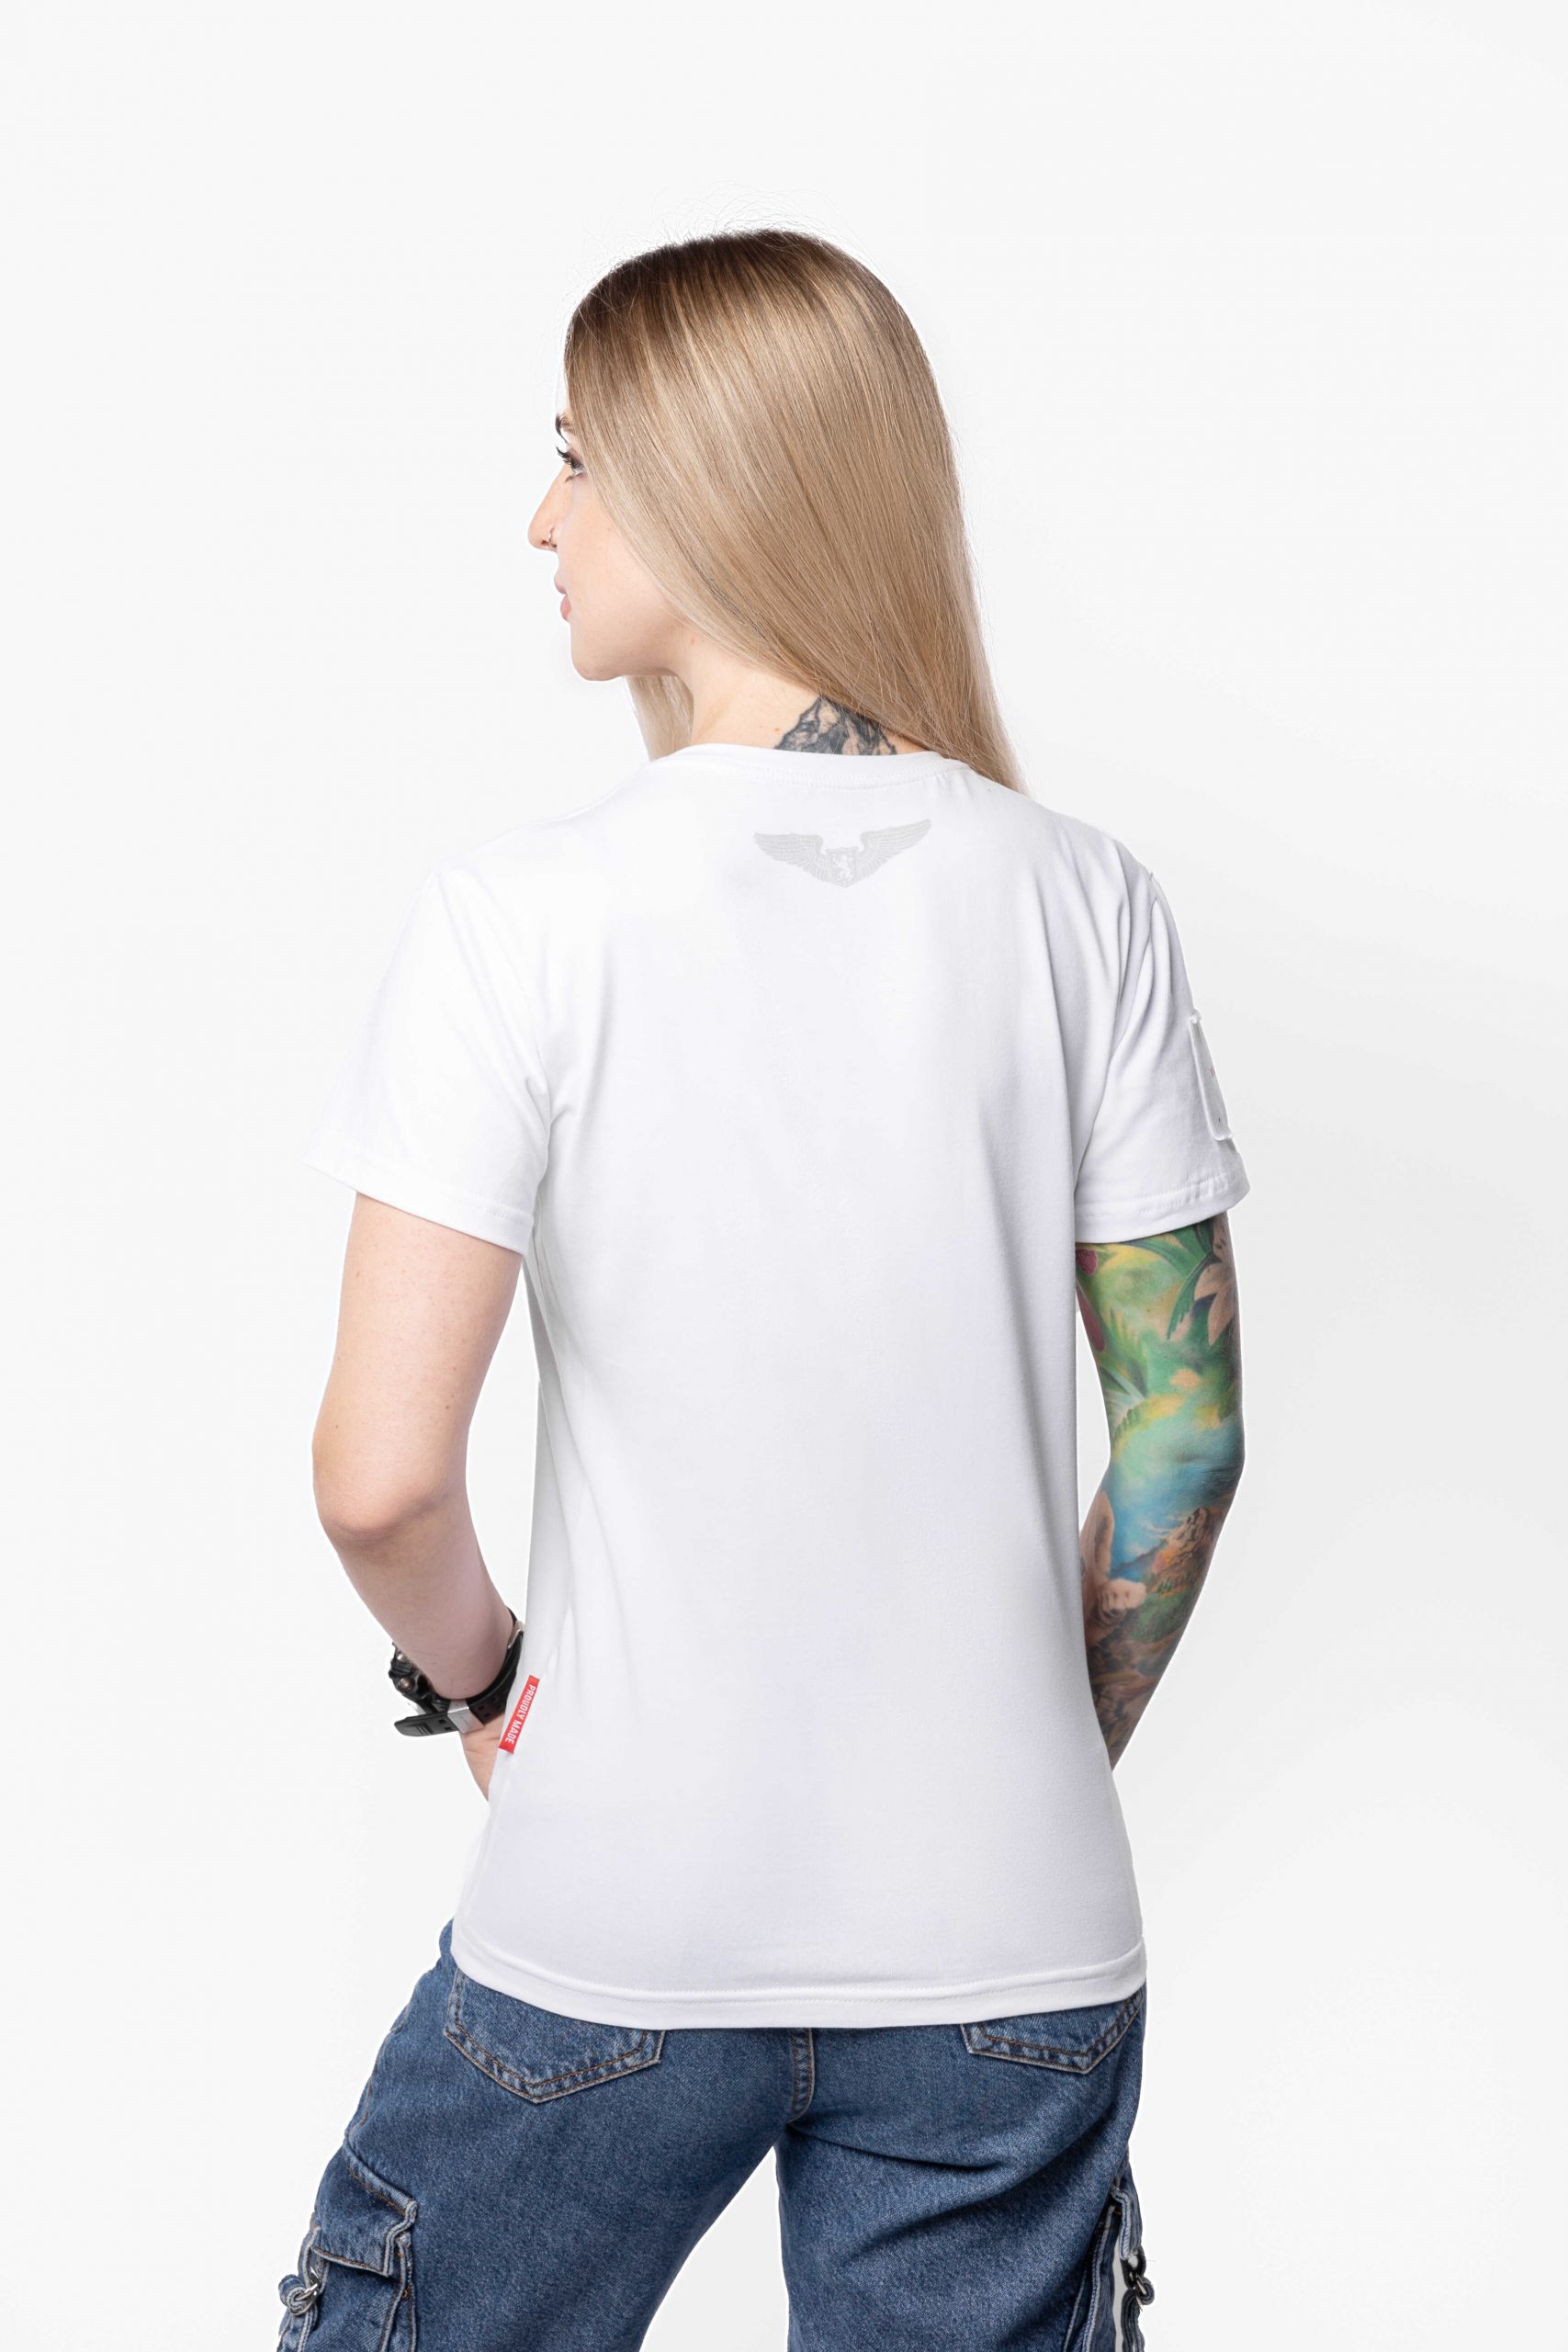 Women's T-Shirt The Worst Is Behind. Color white. 1.